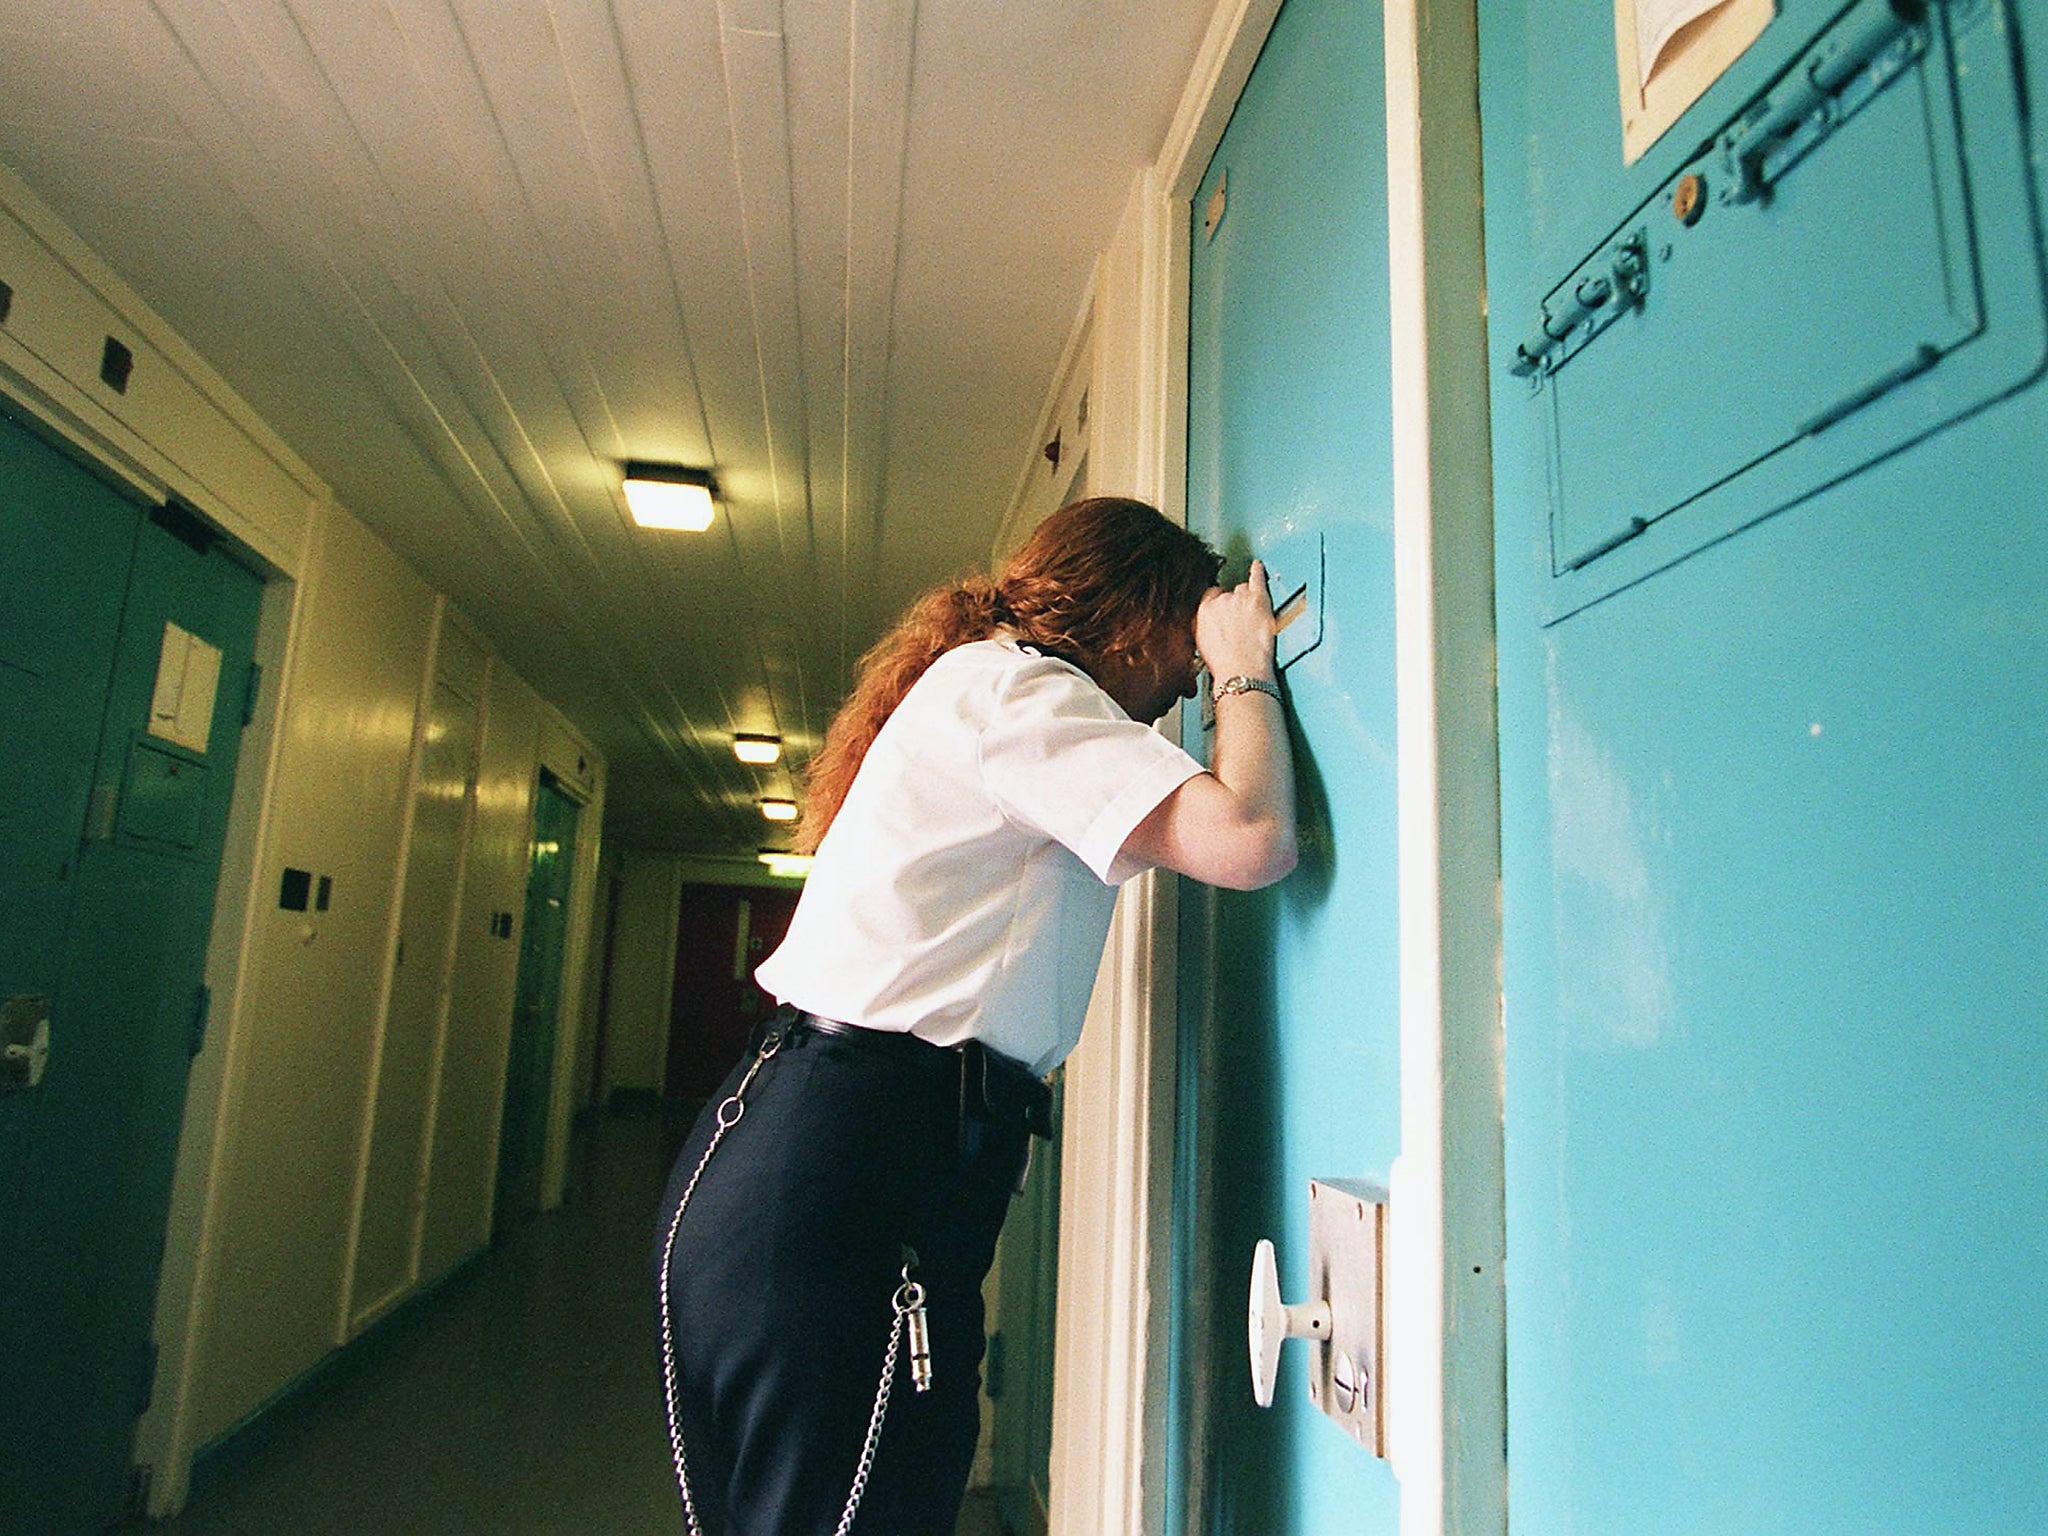 Figures released by the Prison Reform Trust reveal that 46 per cent of women in prison have tried to take their own lives, compared with six per cent of the general population